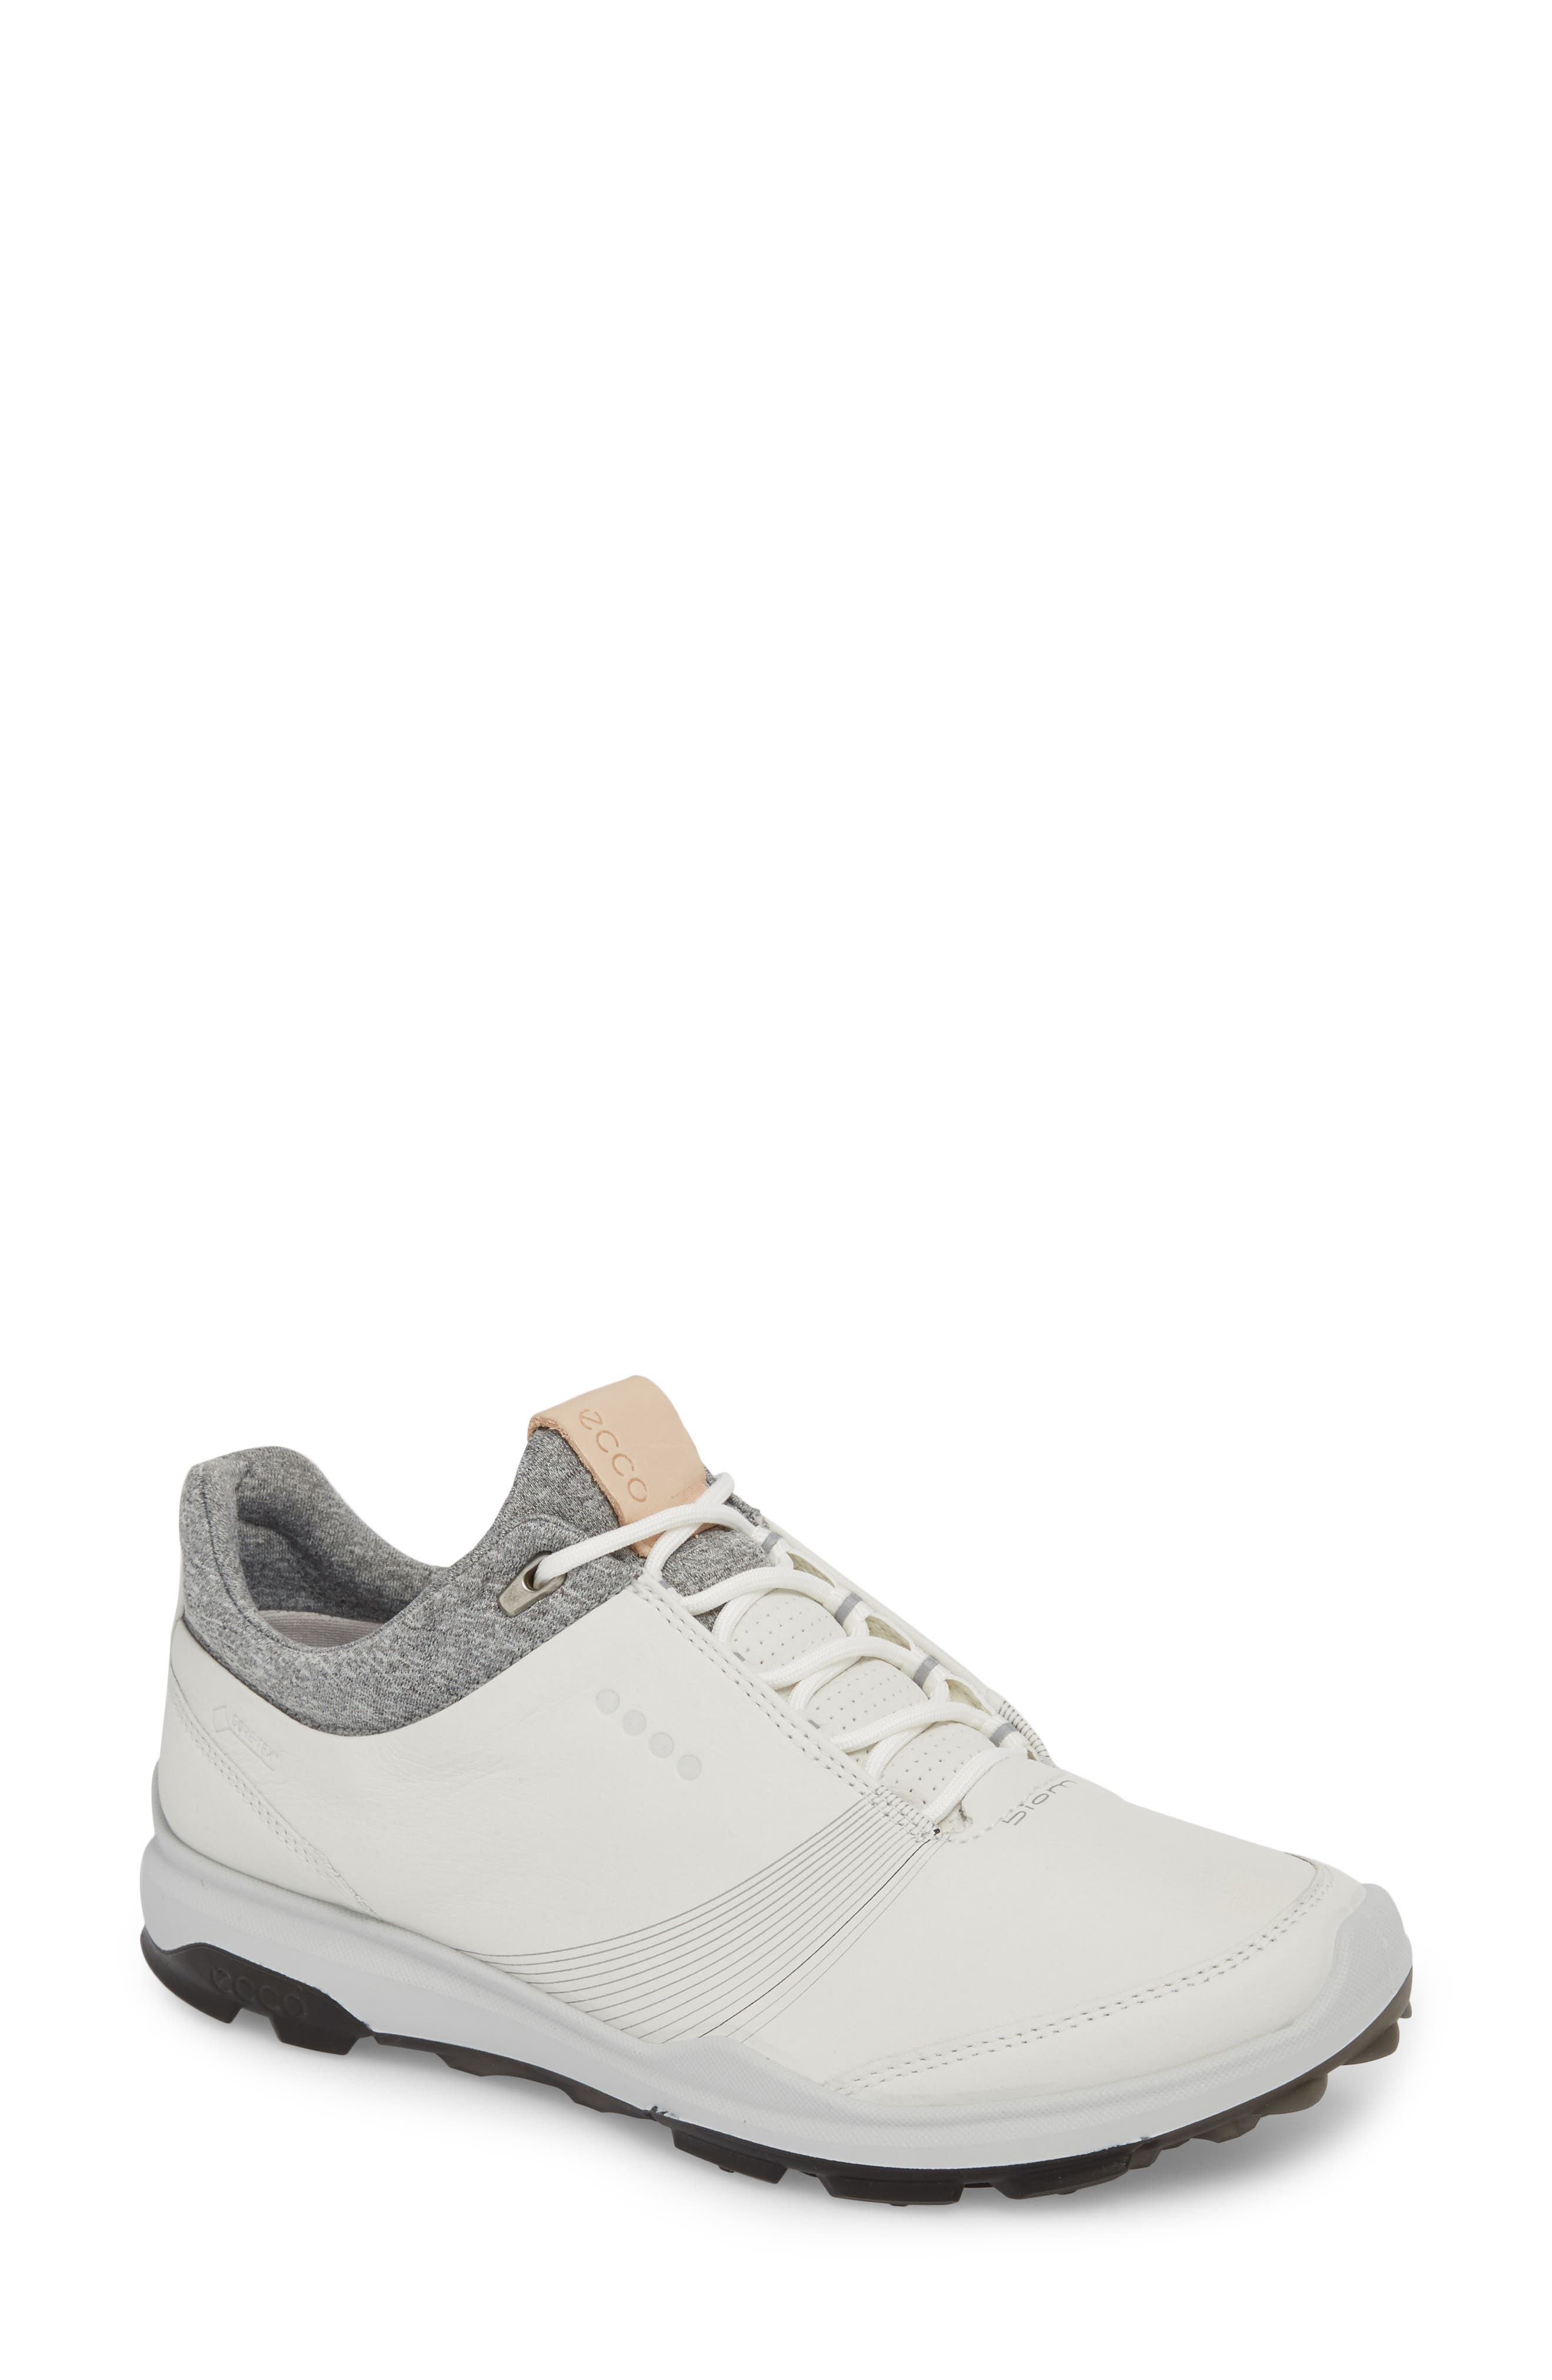 nordstrom shoes ecco womens